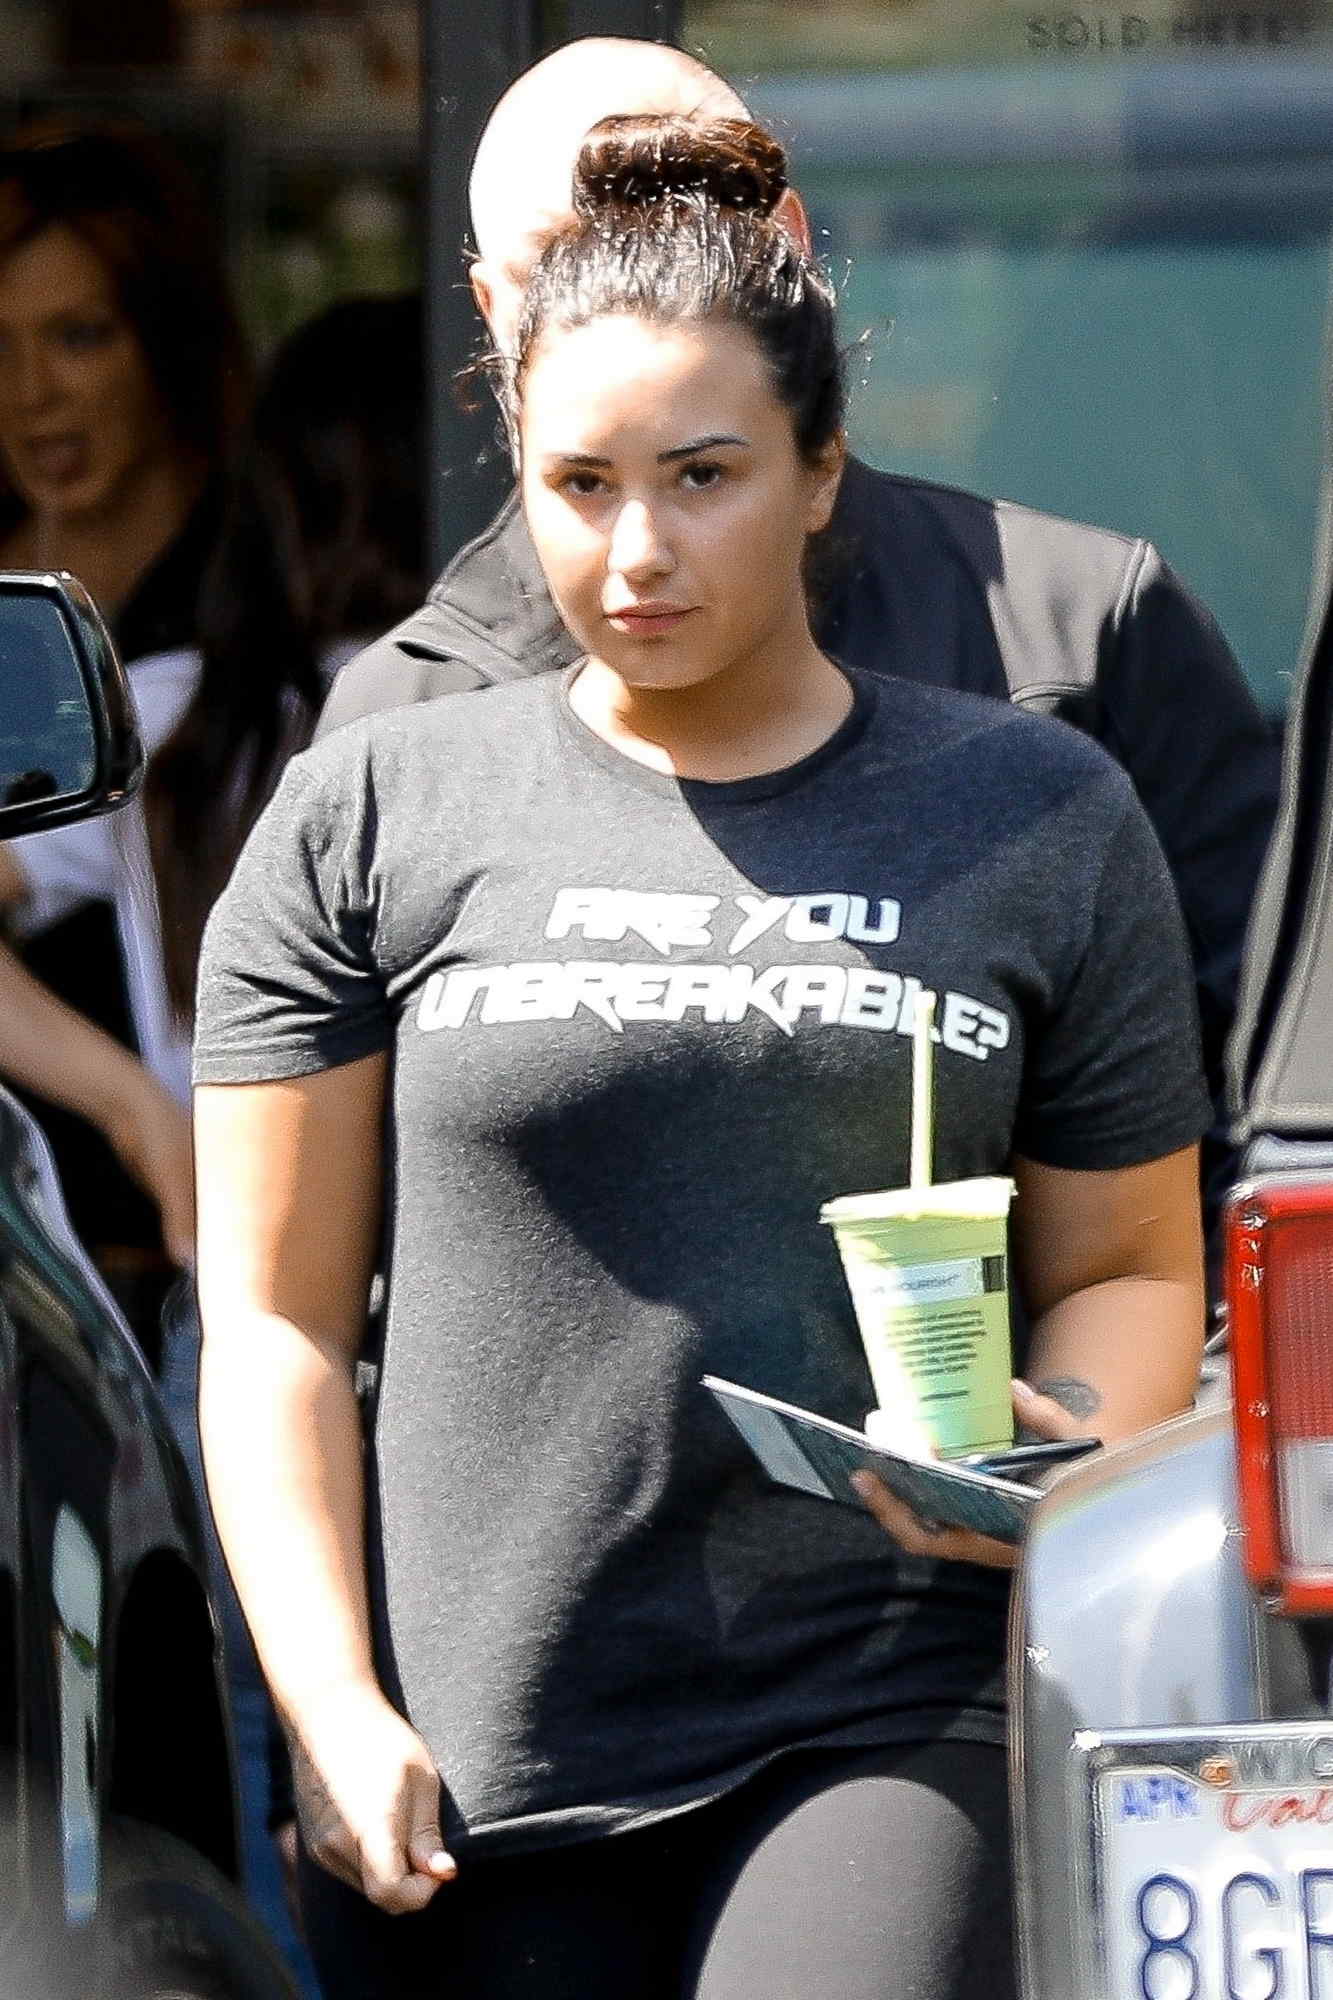 Grabbing_some_juice_after_workout_in_LA_-_March_261.jpg